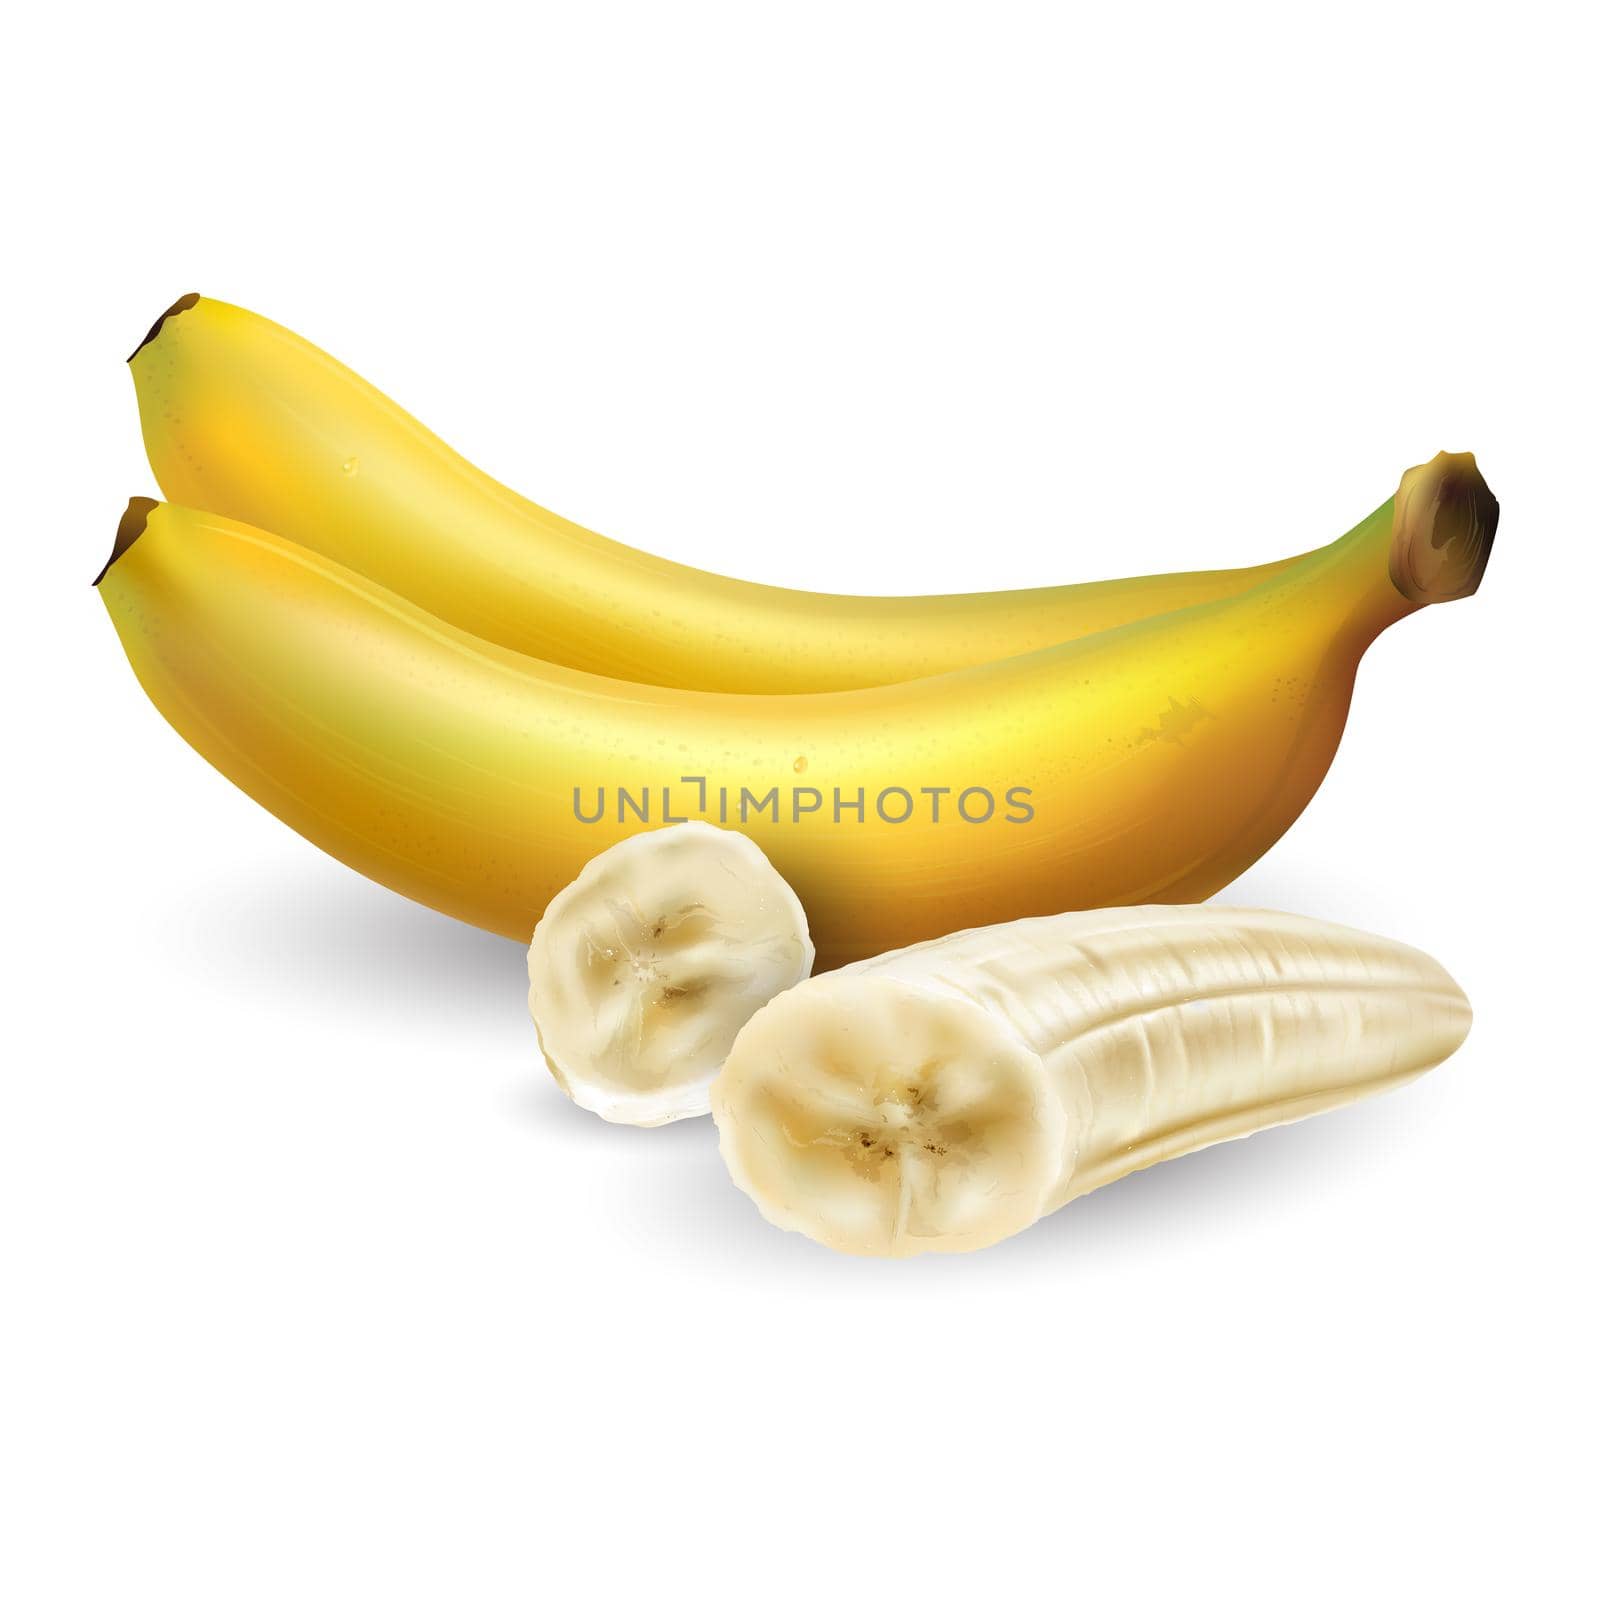 Banana composition with whole bananas and peeled slices. Realistic style illustration.